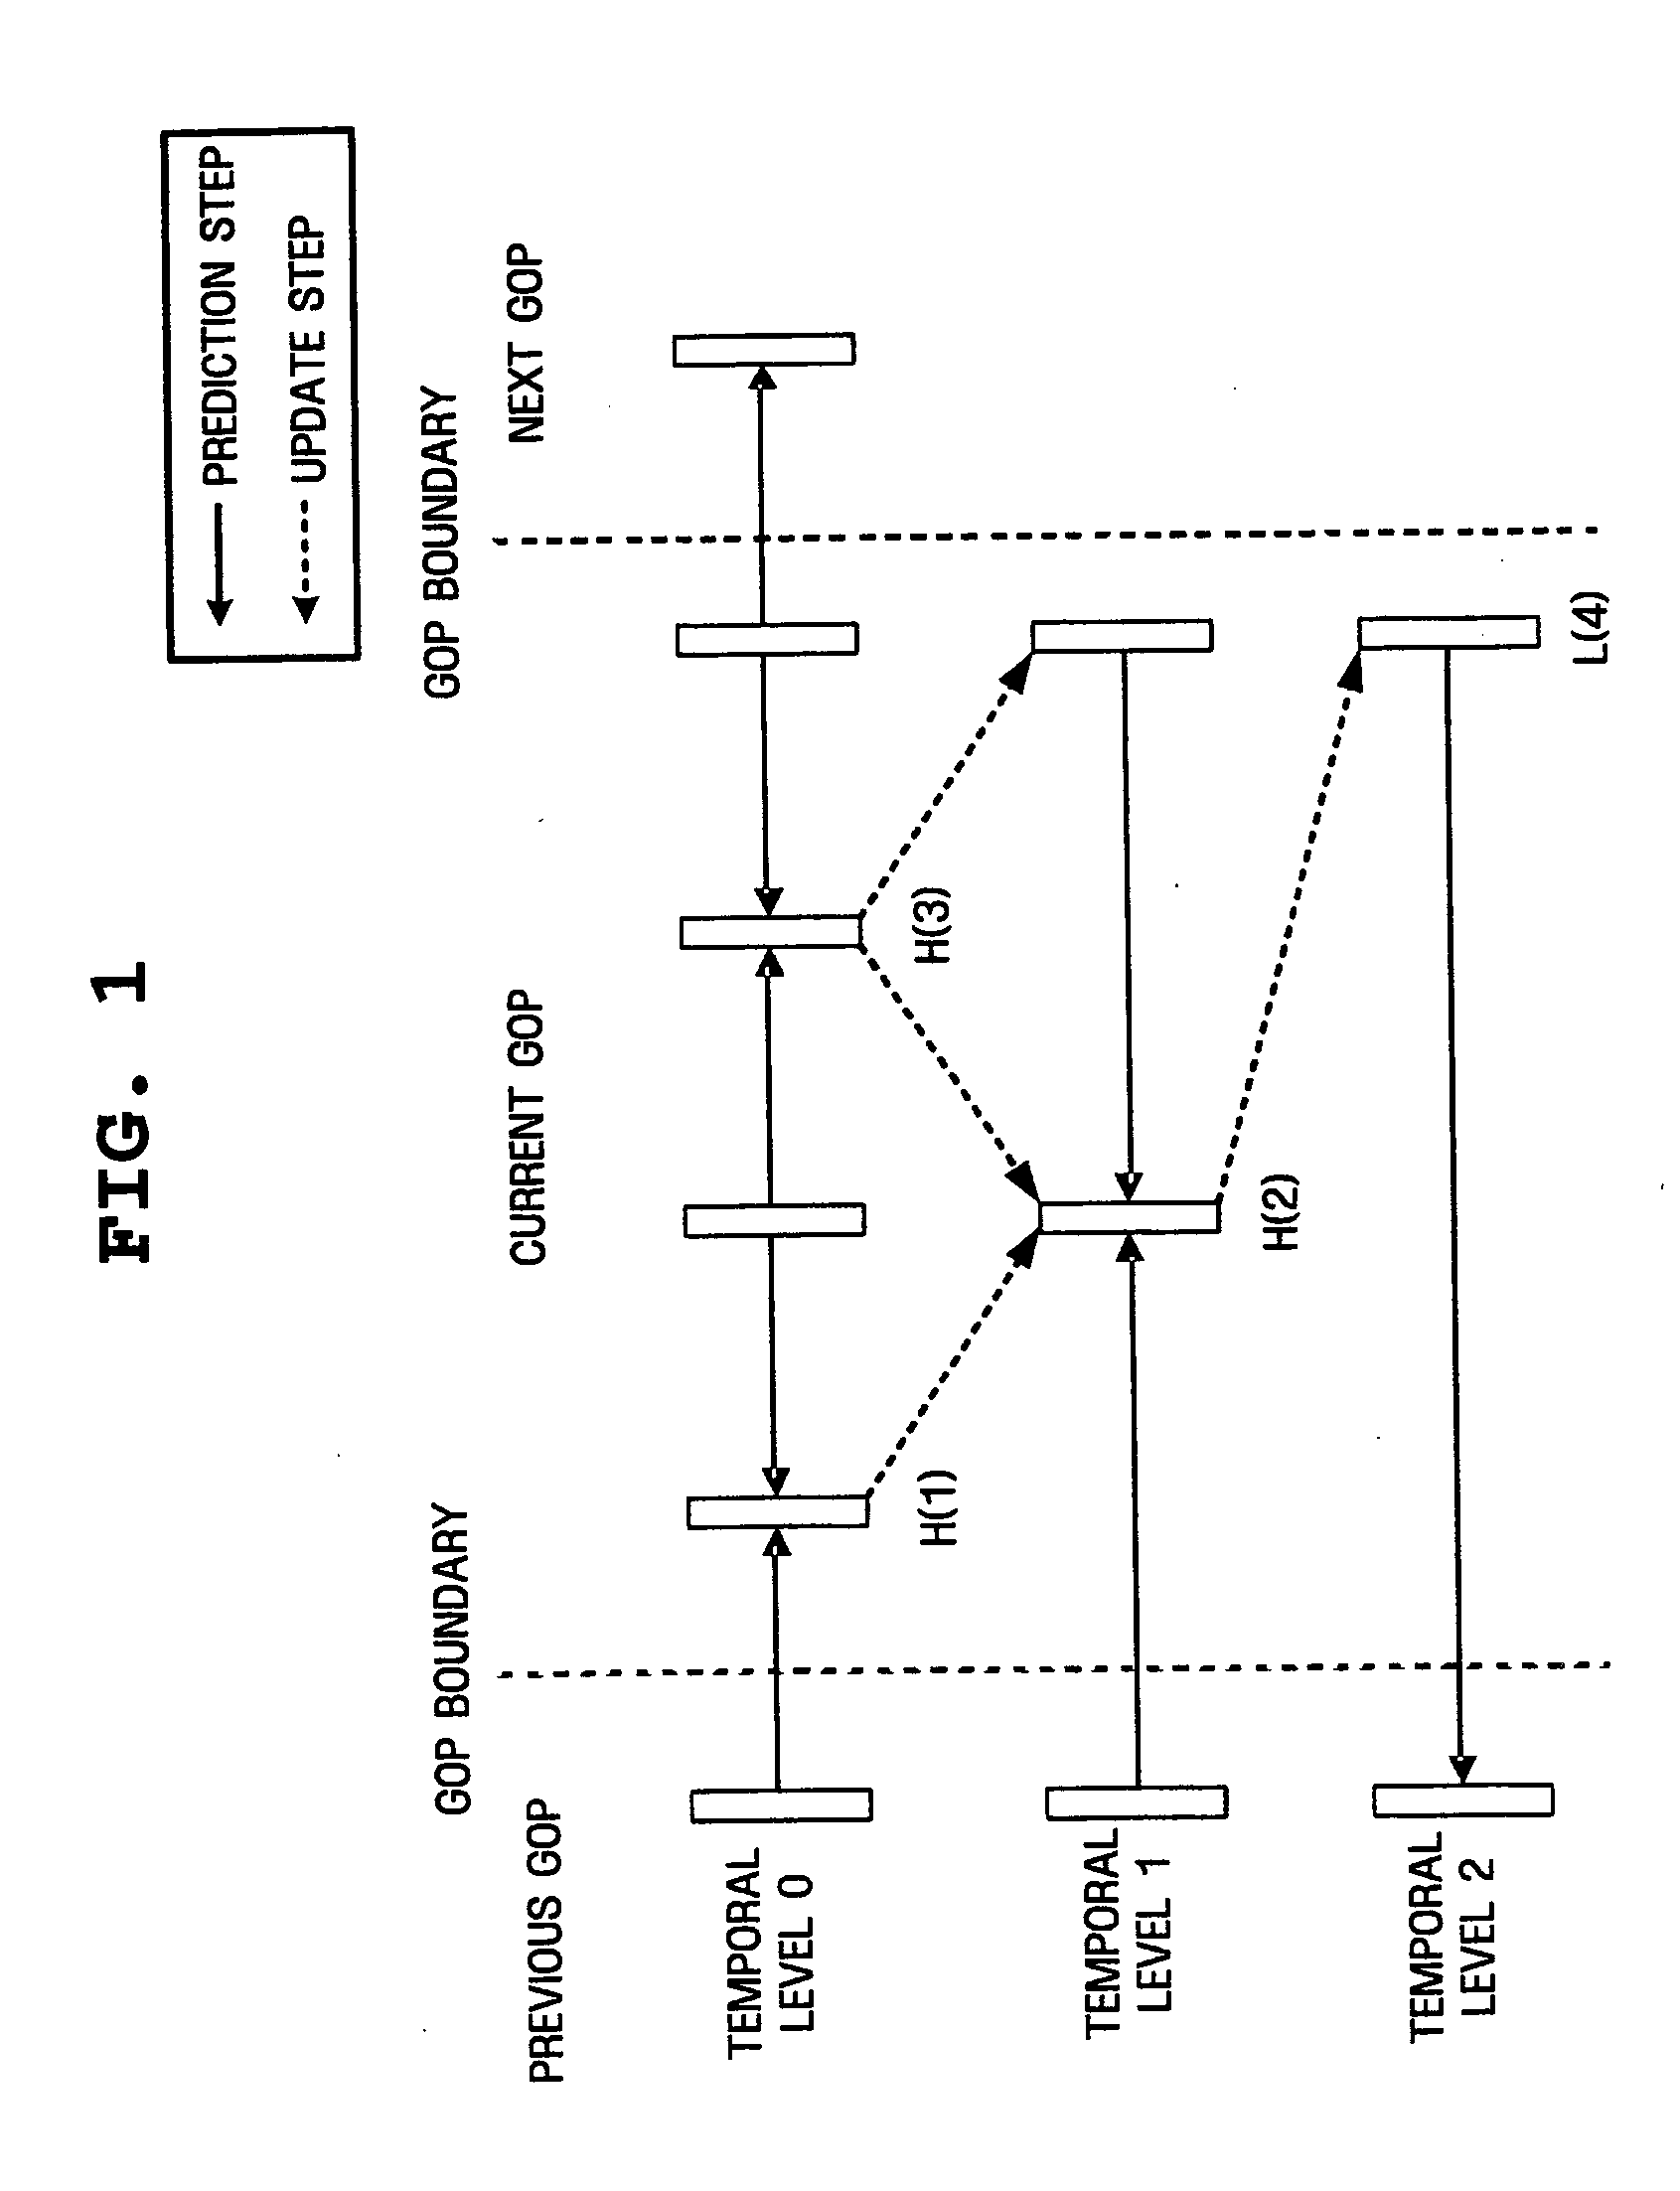 Video coding method and apparatus for reducing mismatch between encoder and decoder